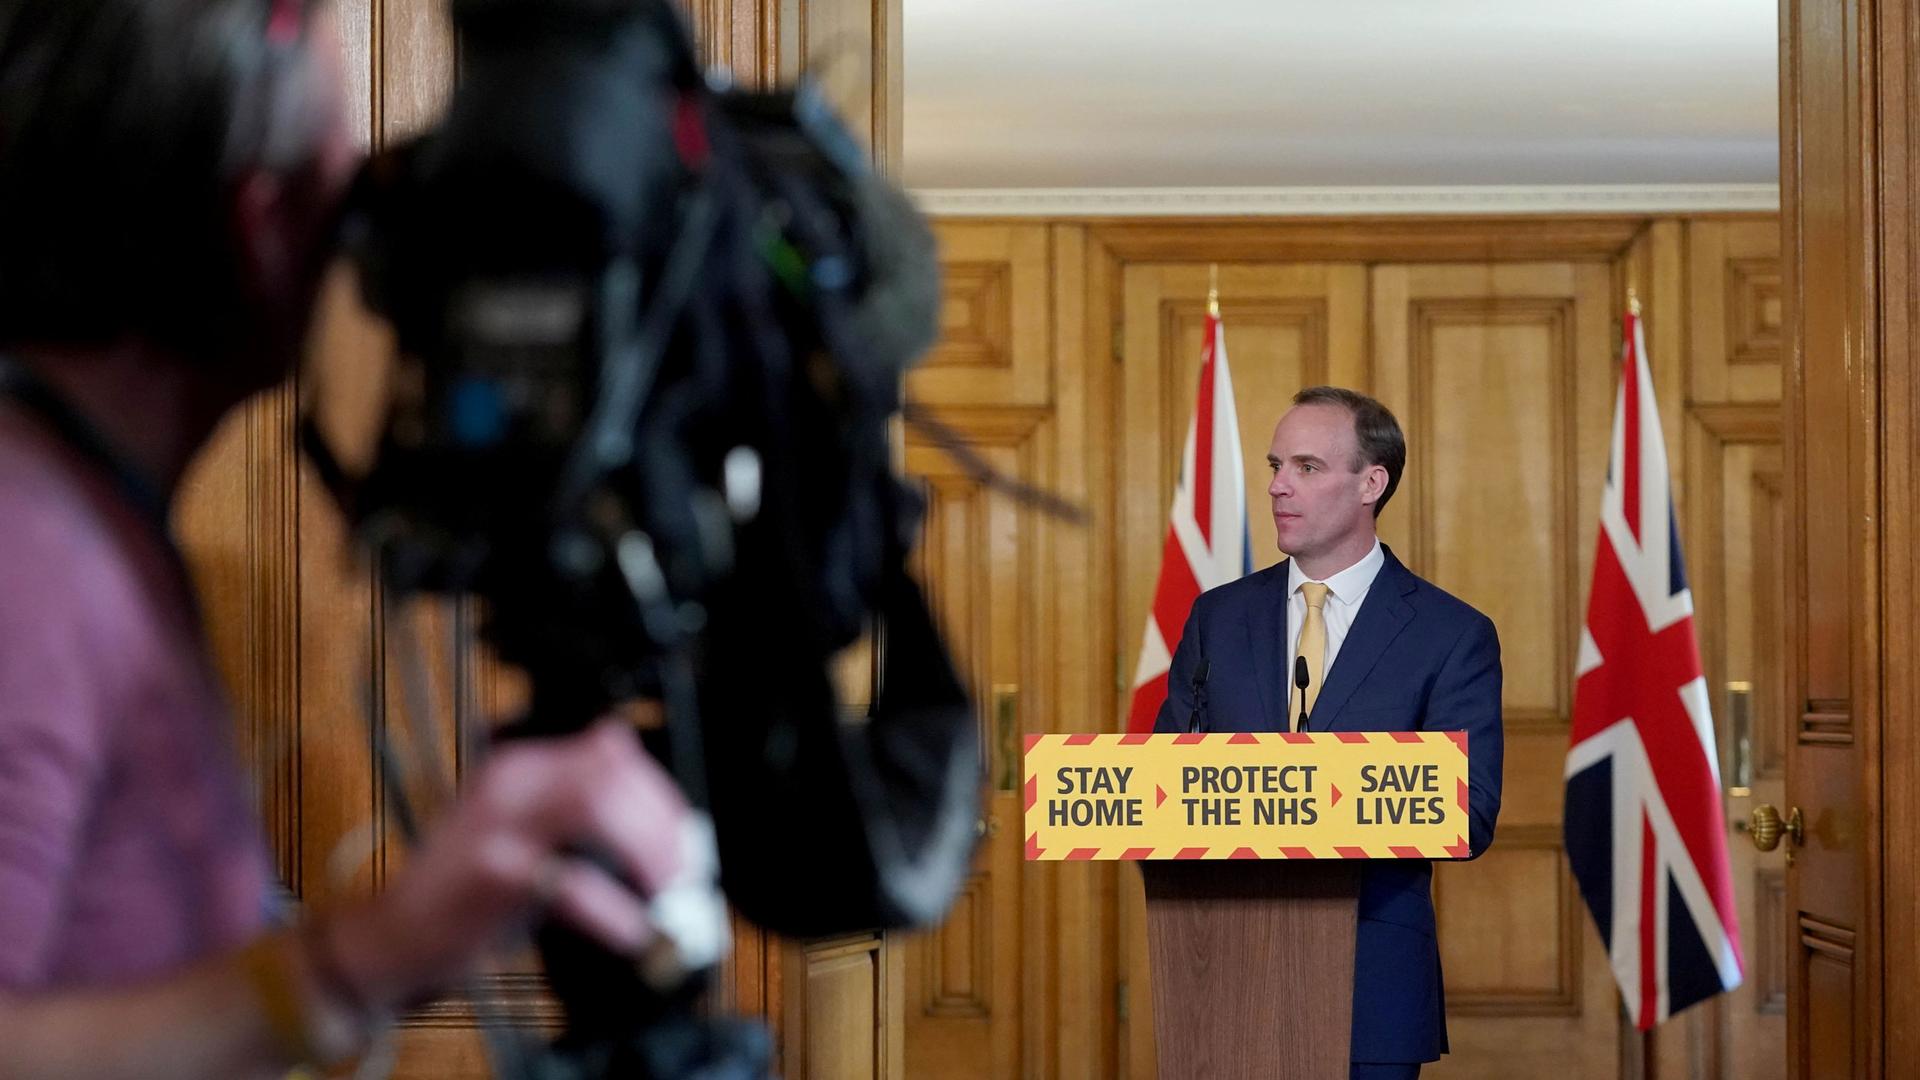 Britain's Foreign Secretary Dominic Raab is shown standing behind a podium witth the words, 